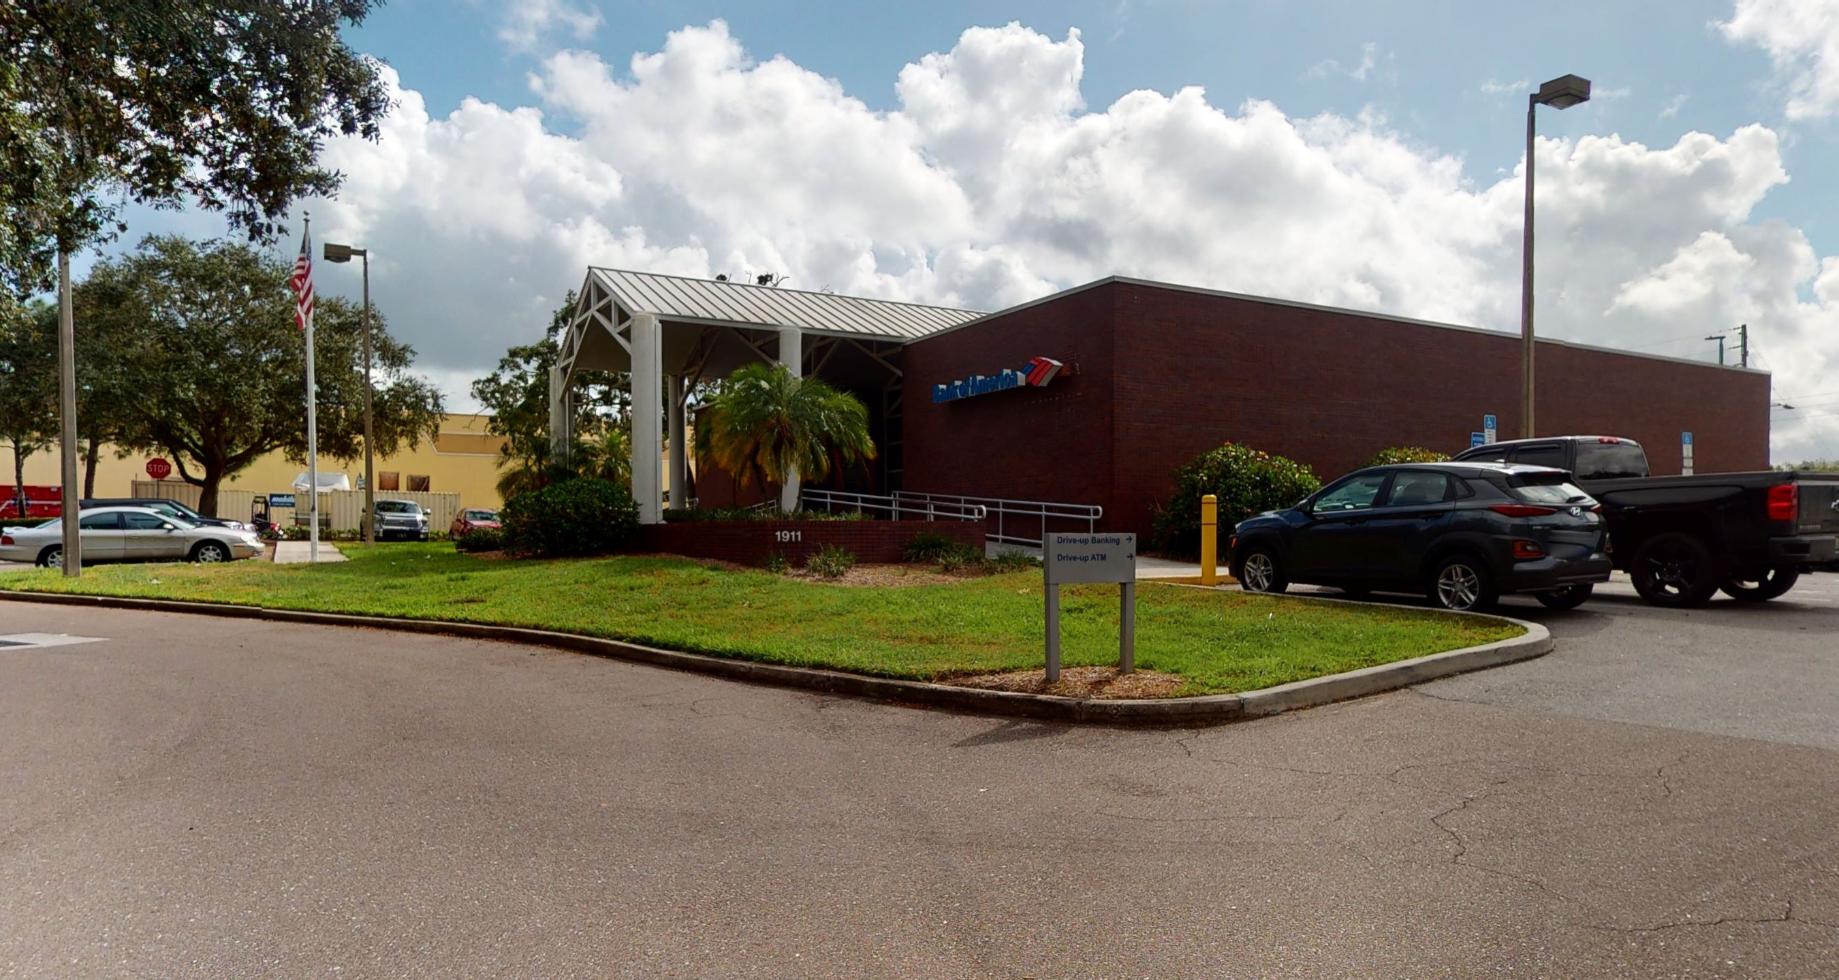 Bank of America financial center with drive-thru ATM and teller | 1911 N Belcher Rd, Clearwater, FL 33763